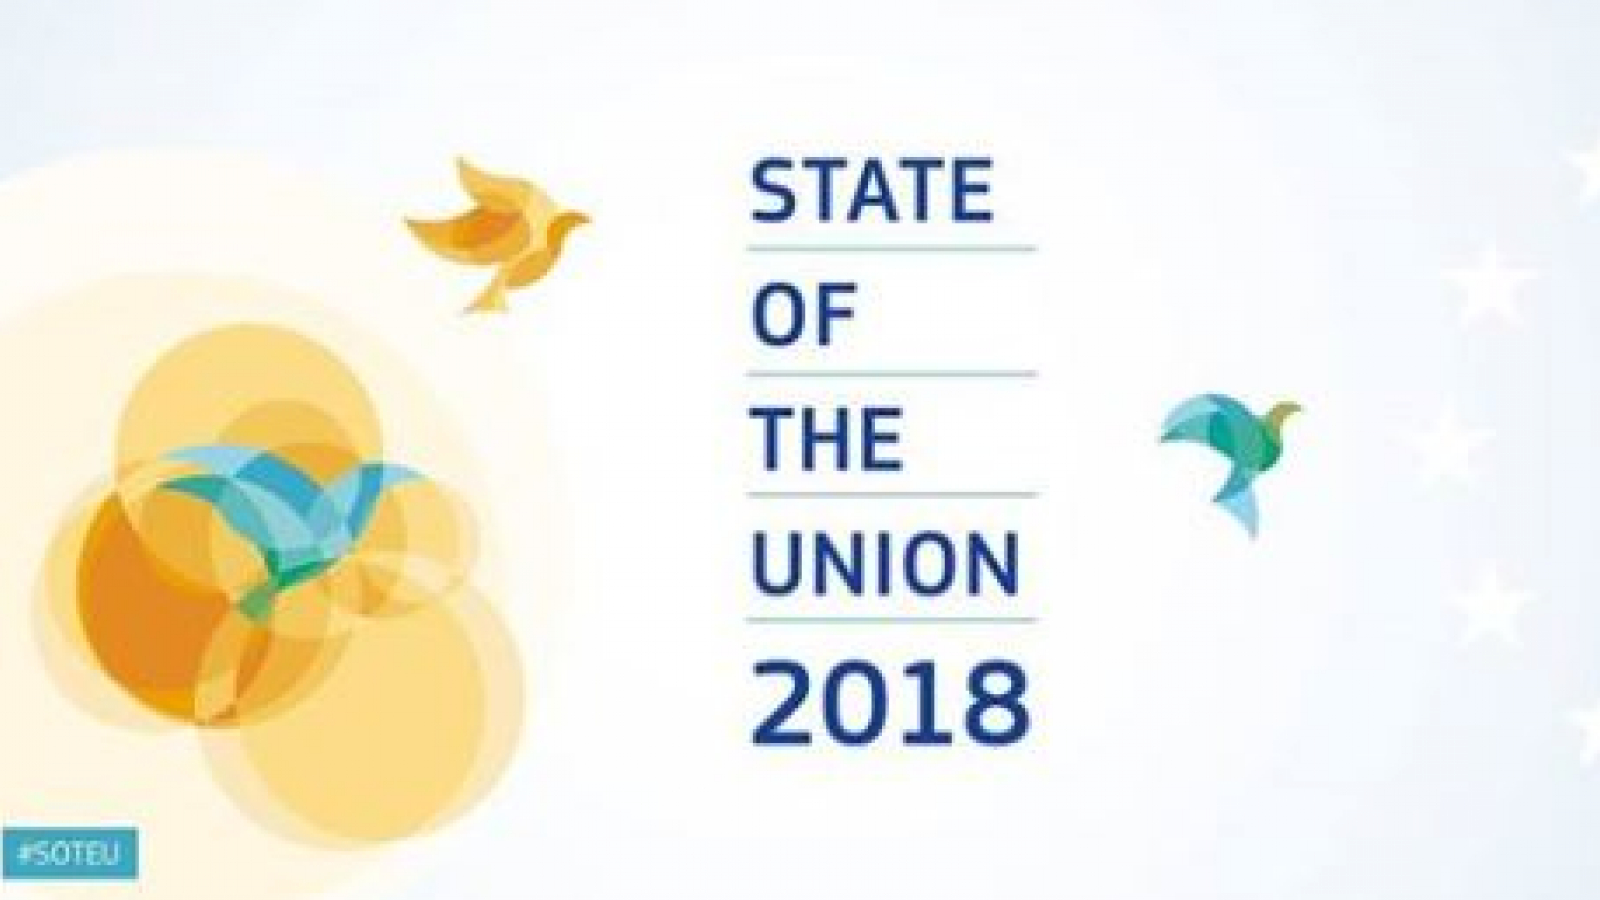 EC President Juncker to deliver annual State of the Union speech on 12 September